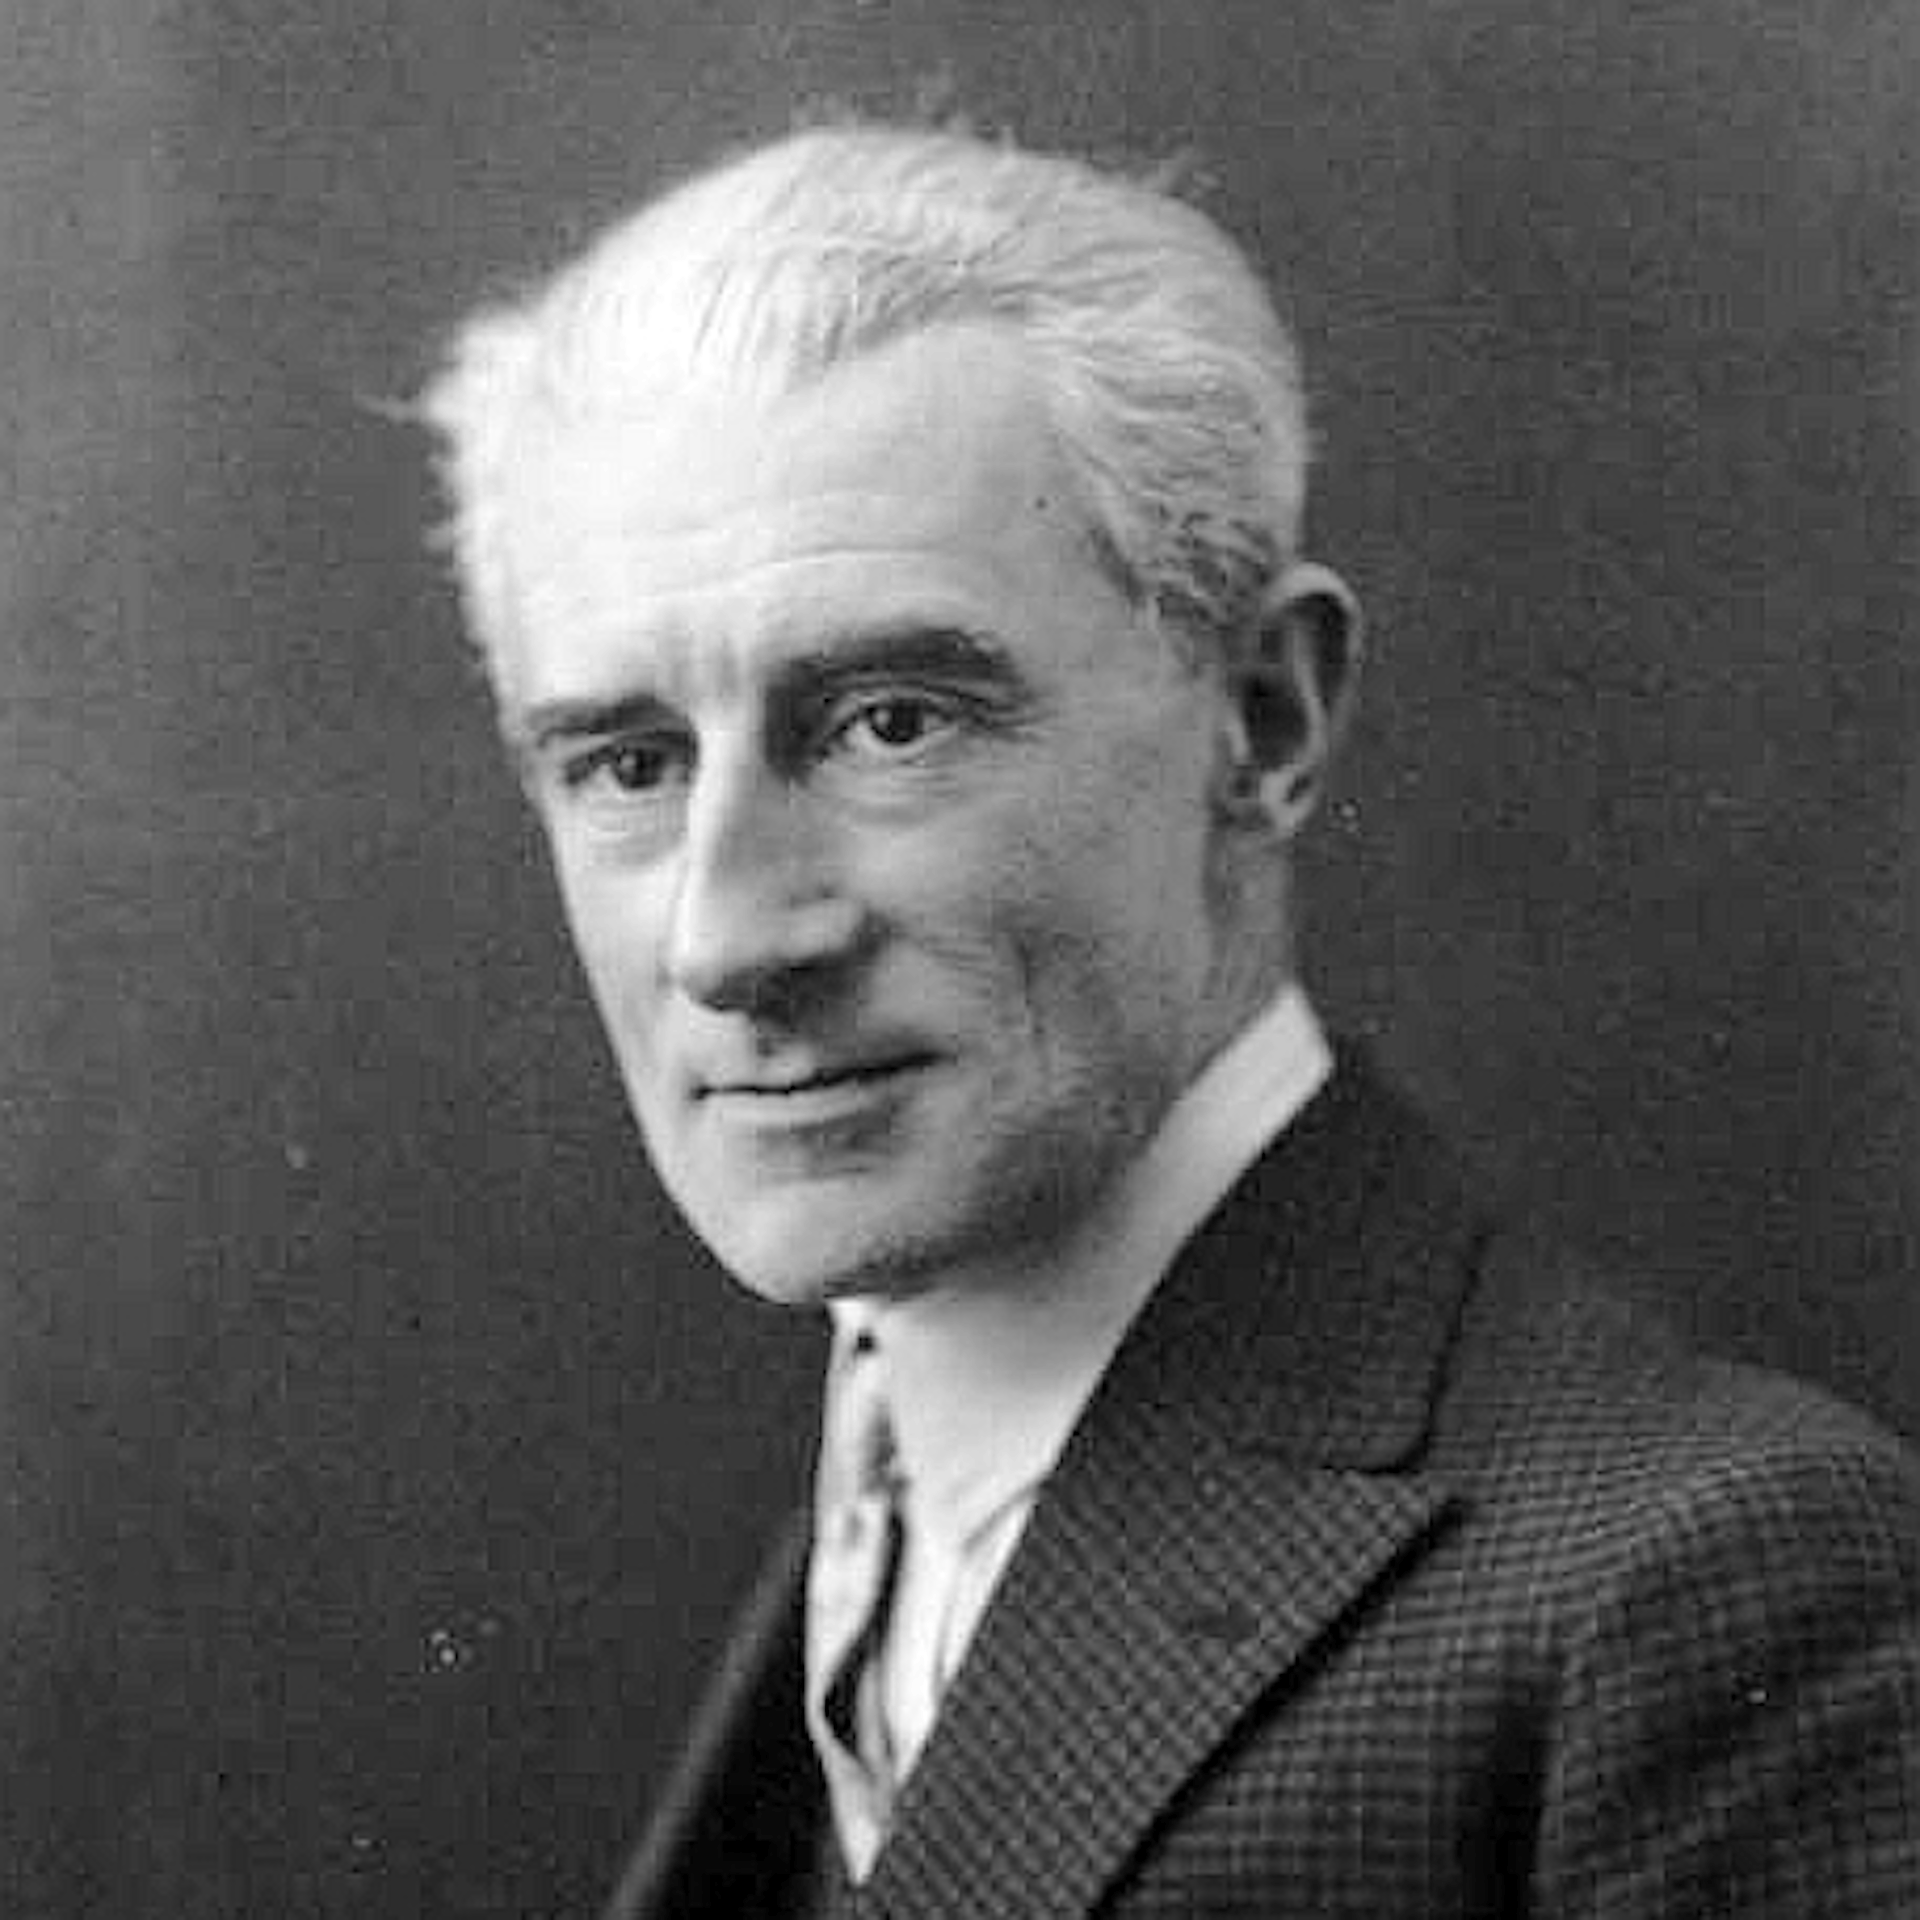 Maurice Ravel: biography, videos, works & important dates.